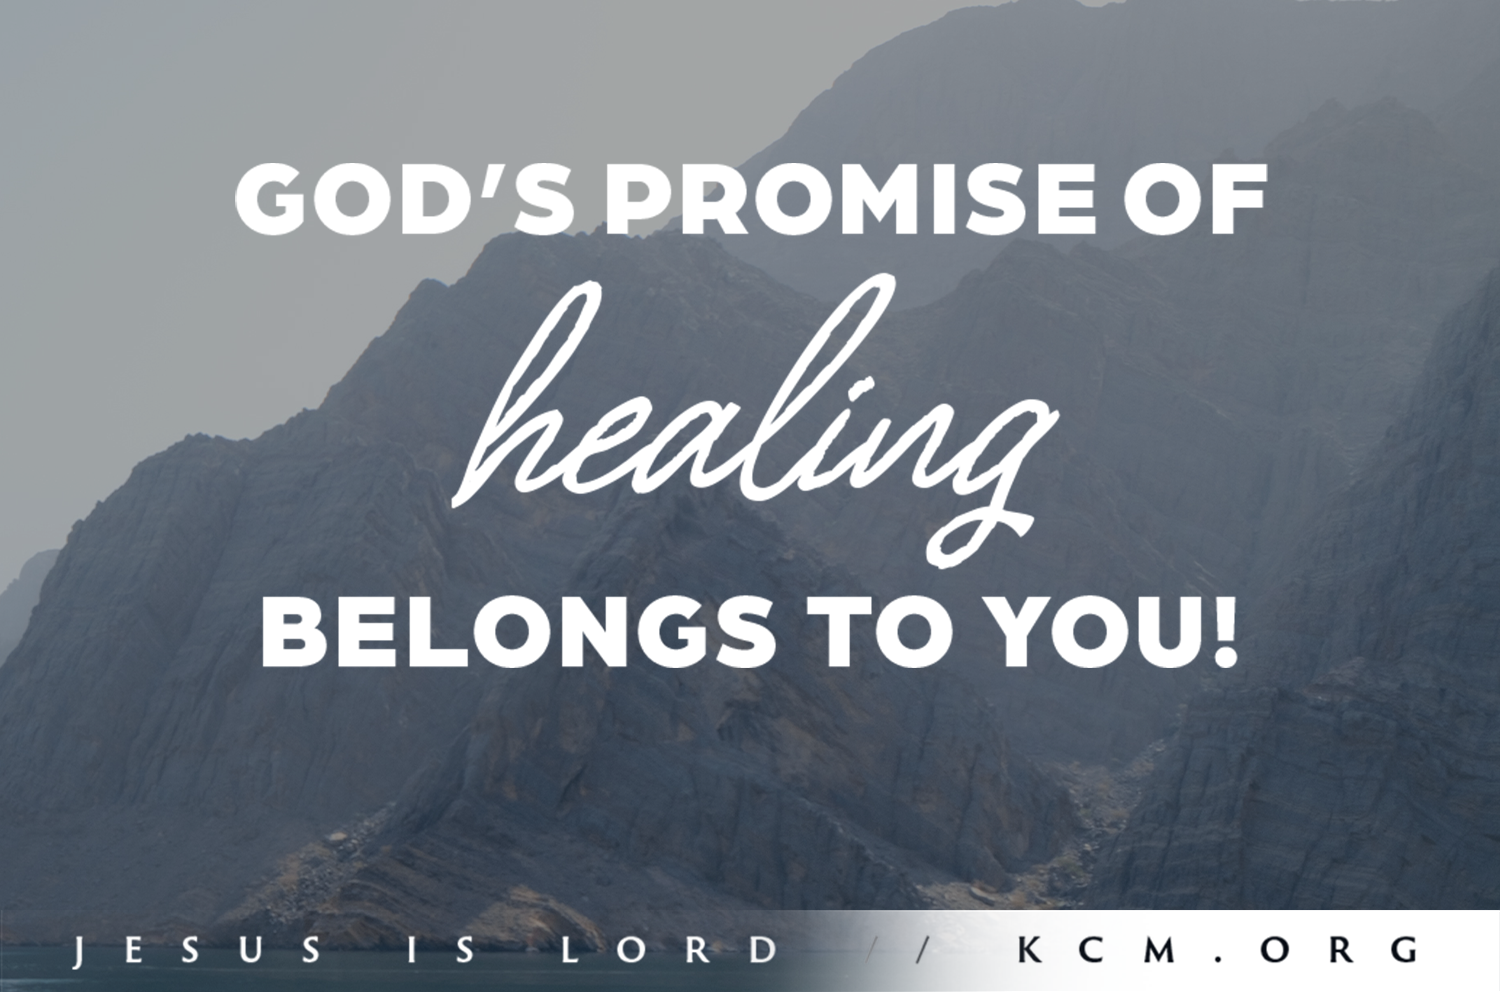 God's promise of healing belongs to you